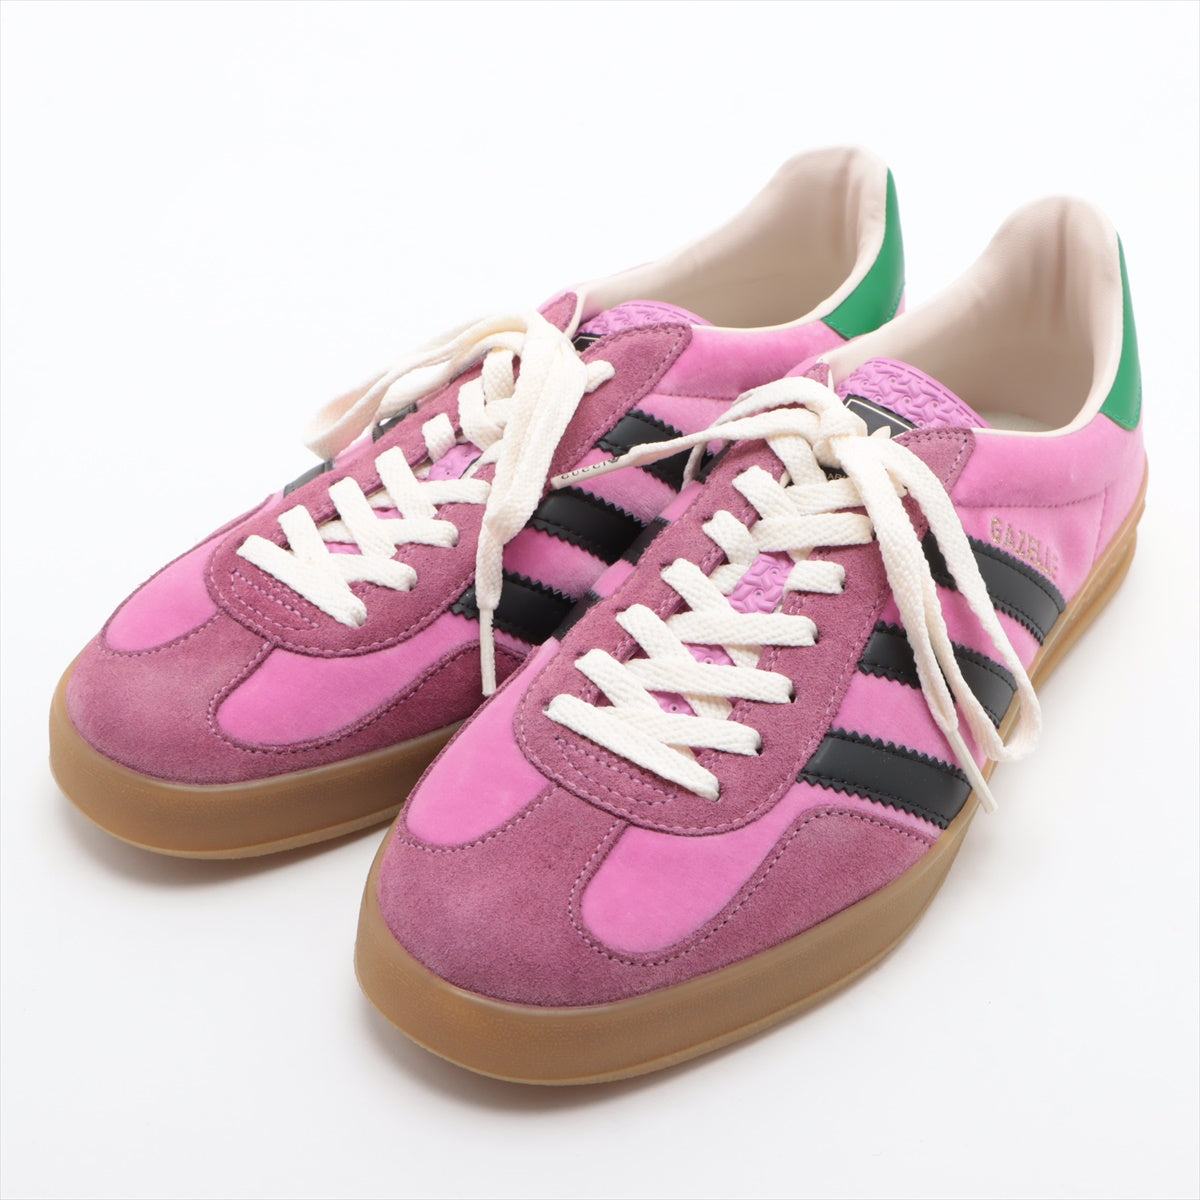 Gucci x adidas Leather & suede Sneakers 27cm Men's Pink HQ8852 Gazelle Is there a replacement string